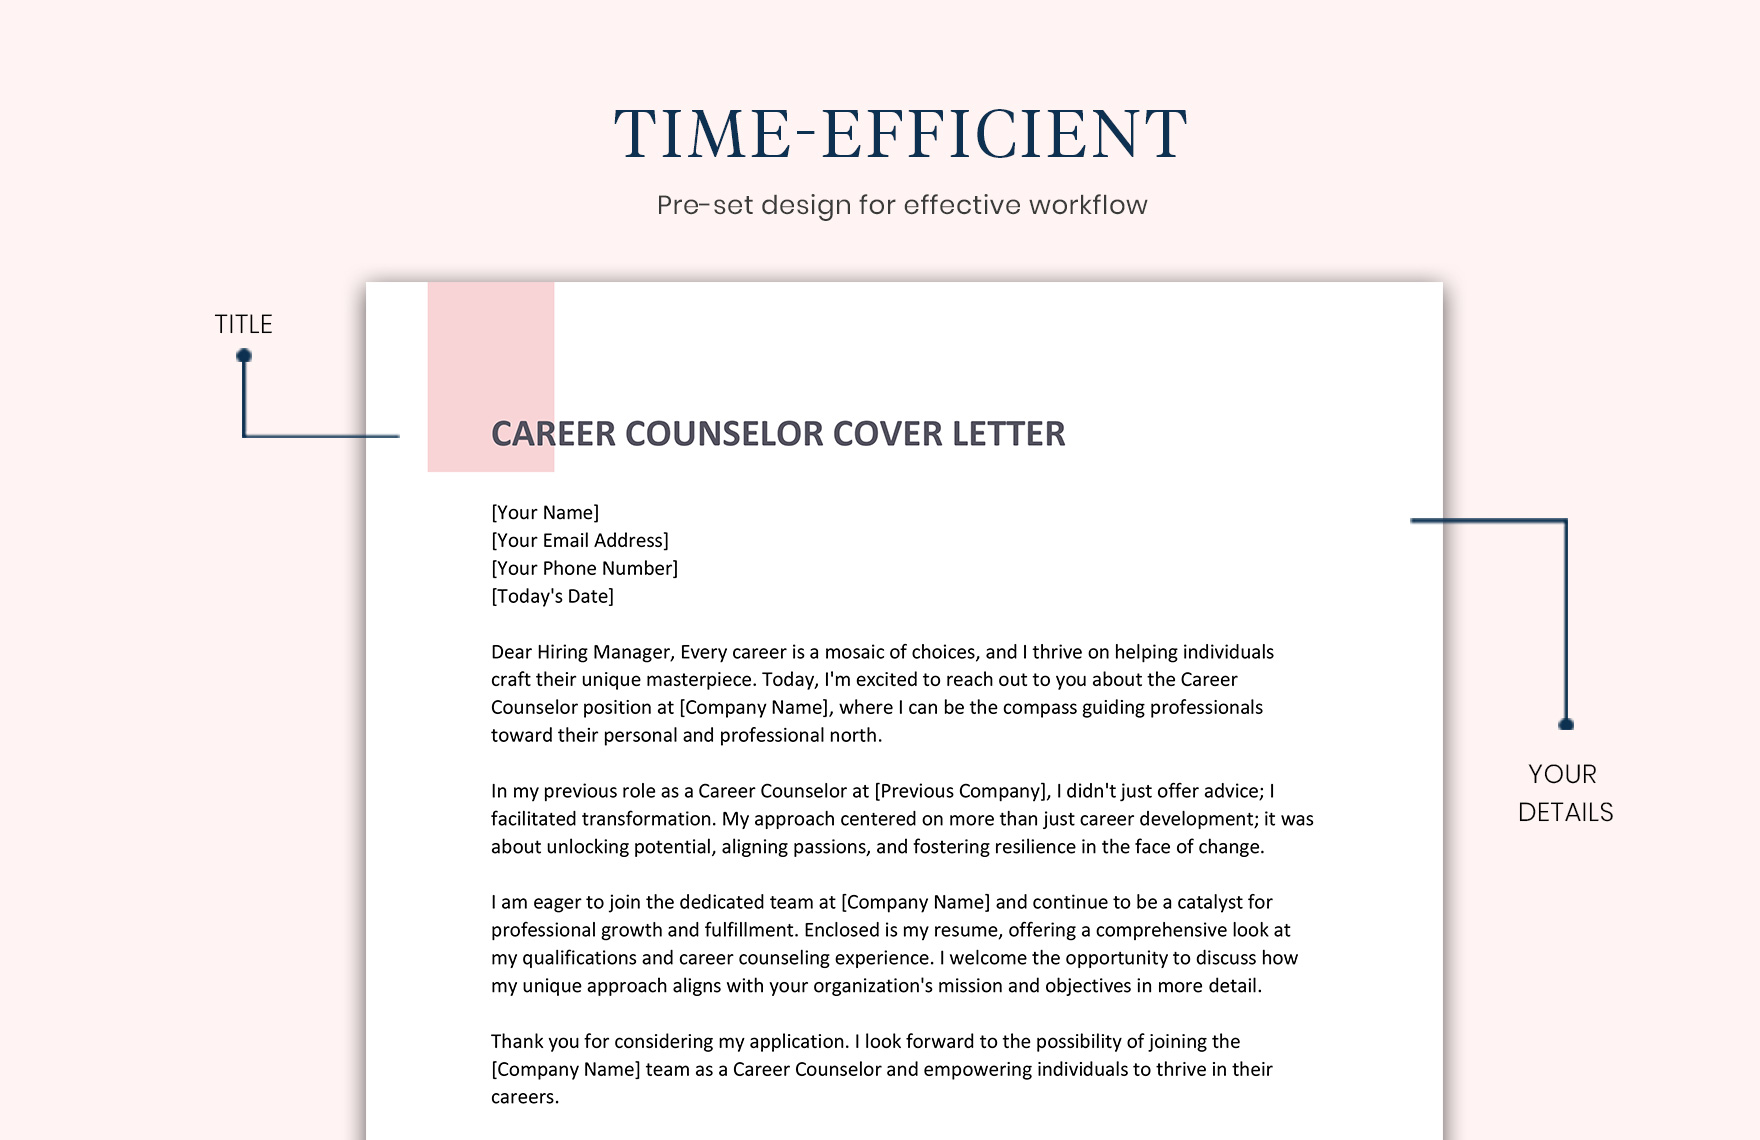 Career Counselor Cover Letter